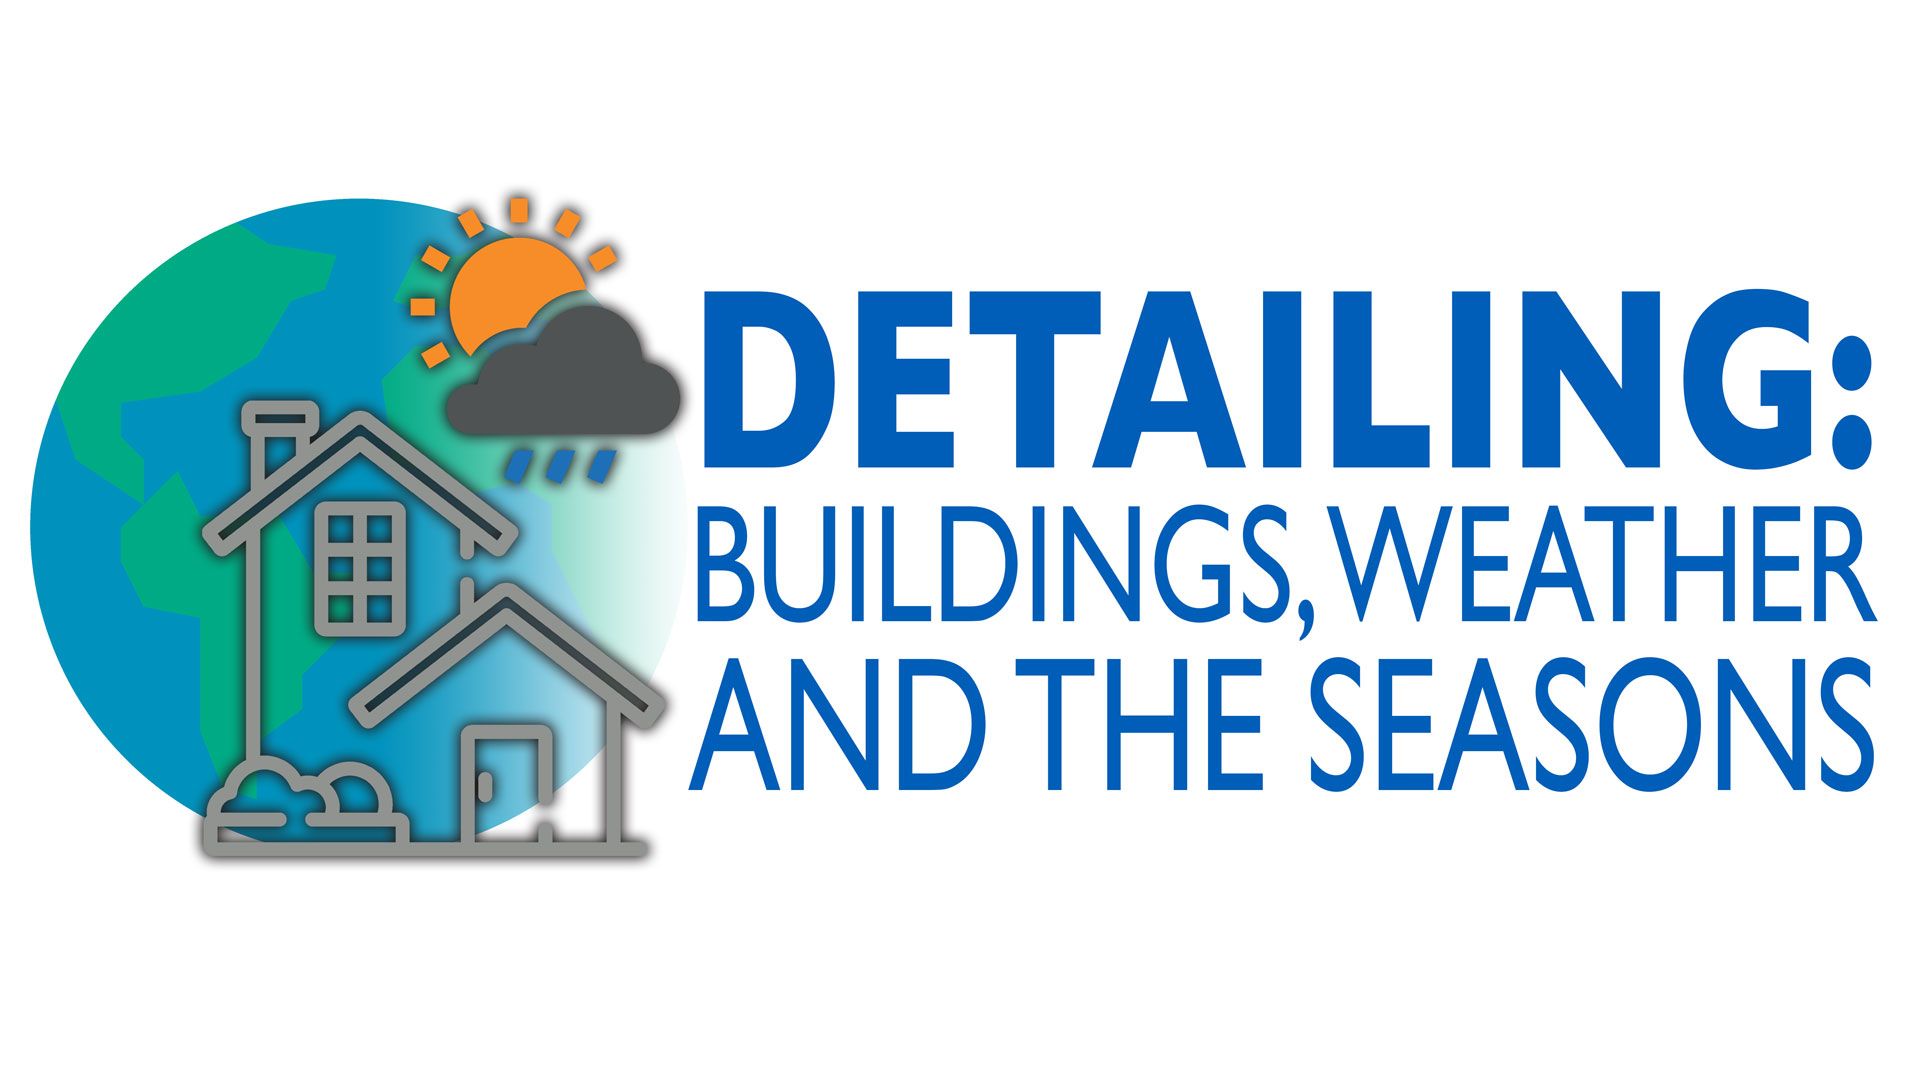 Detailing: Buildings, Weather and the Seasons